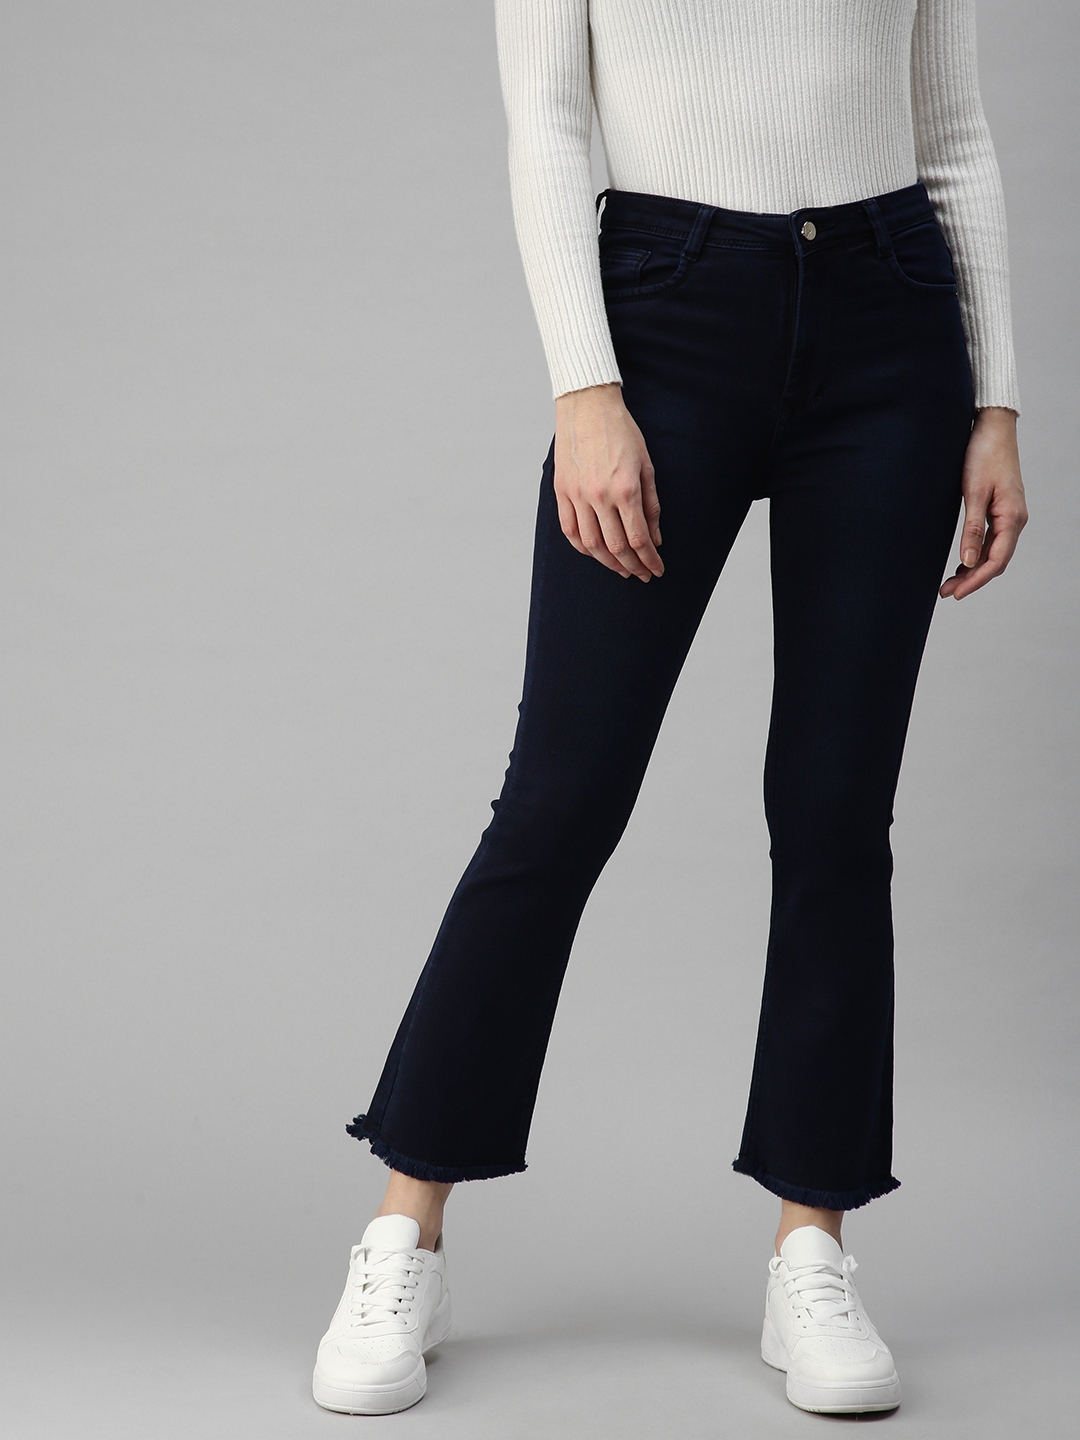 Showoff | SHOWOFF Women's Bootcut Clean Look Navy Blue Jeans 0